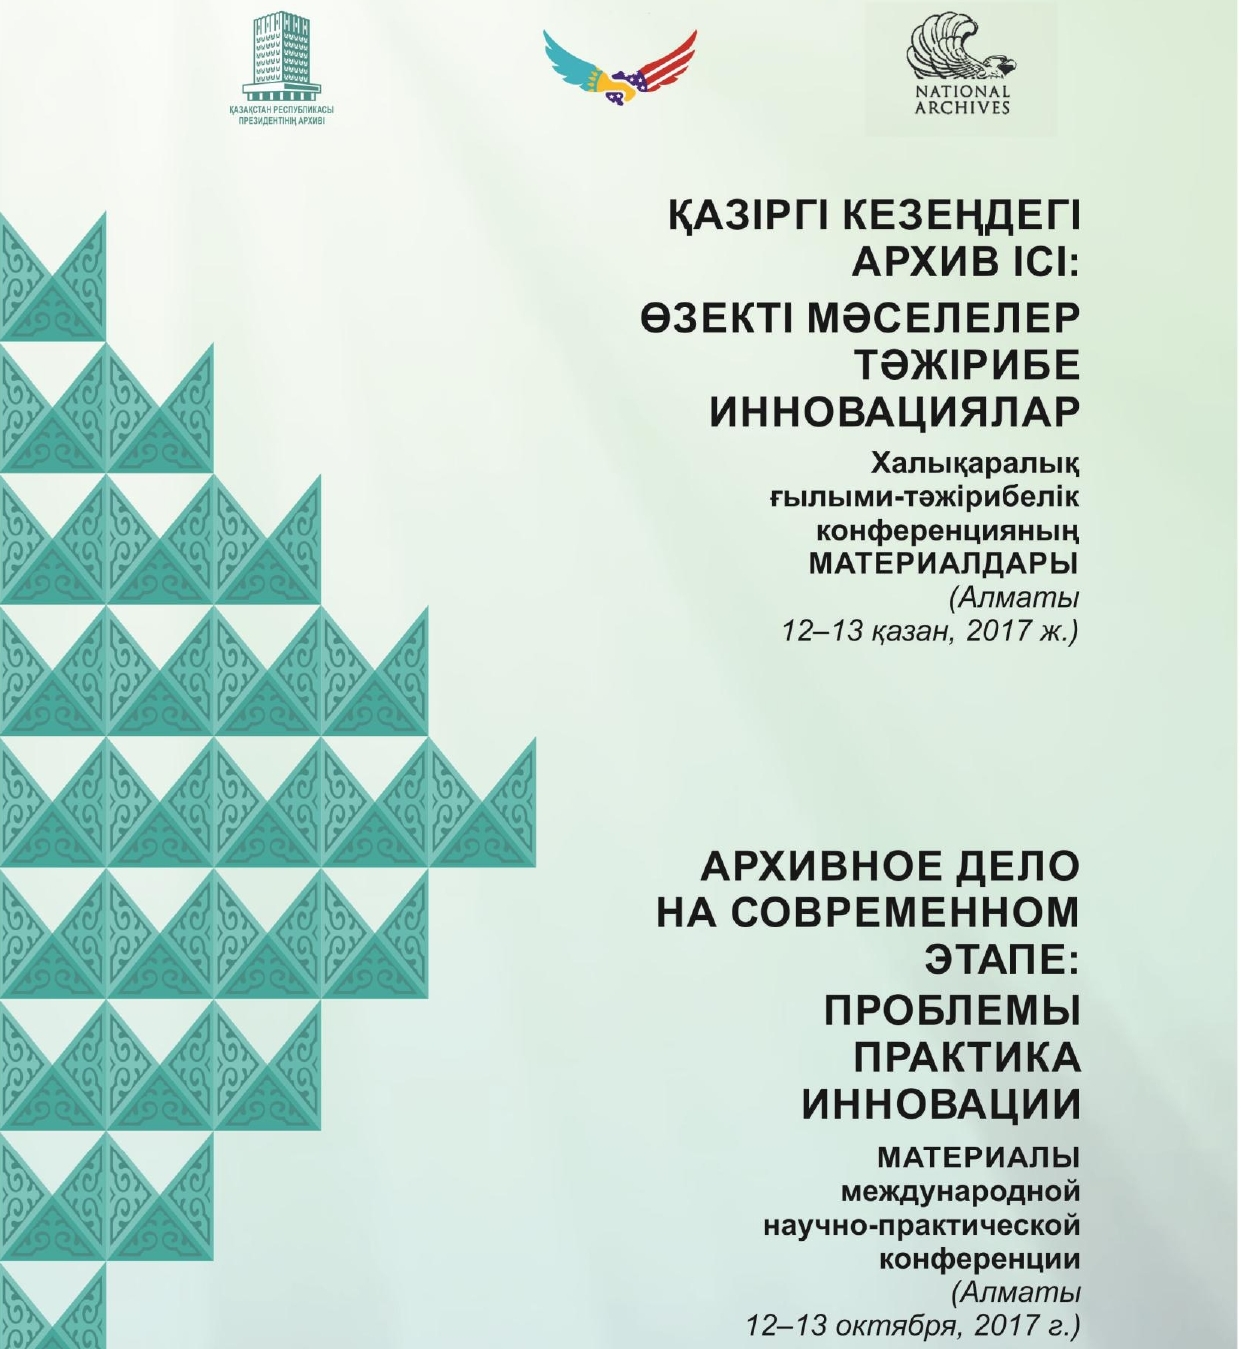 Proceedings of the International scientific-practical conference "Archivalry at the present stage: problems, practice, innovations". Almaty, October 12–13, 2017